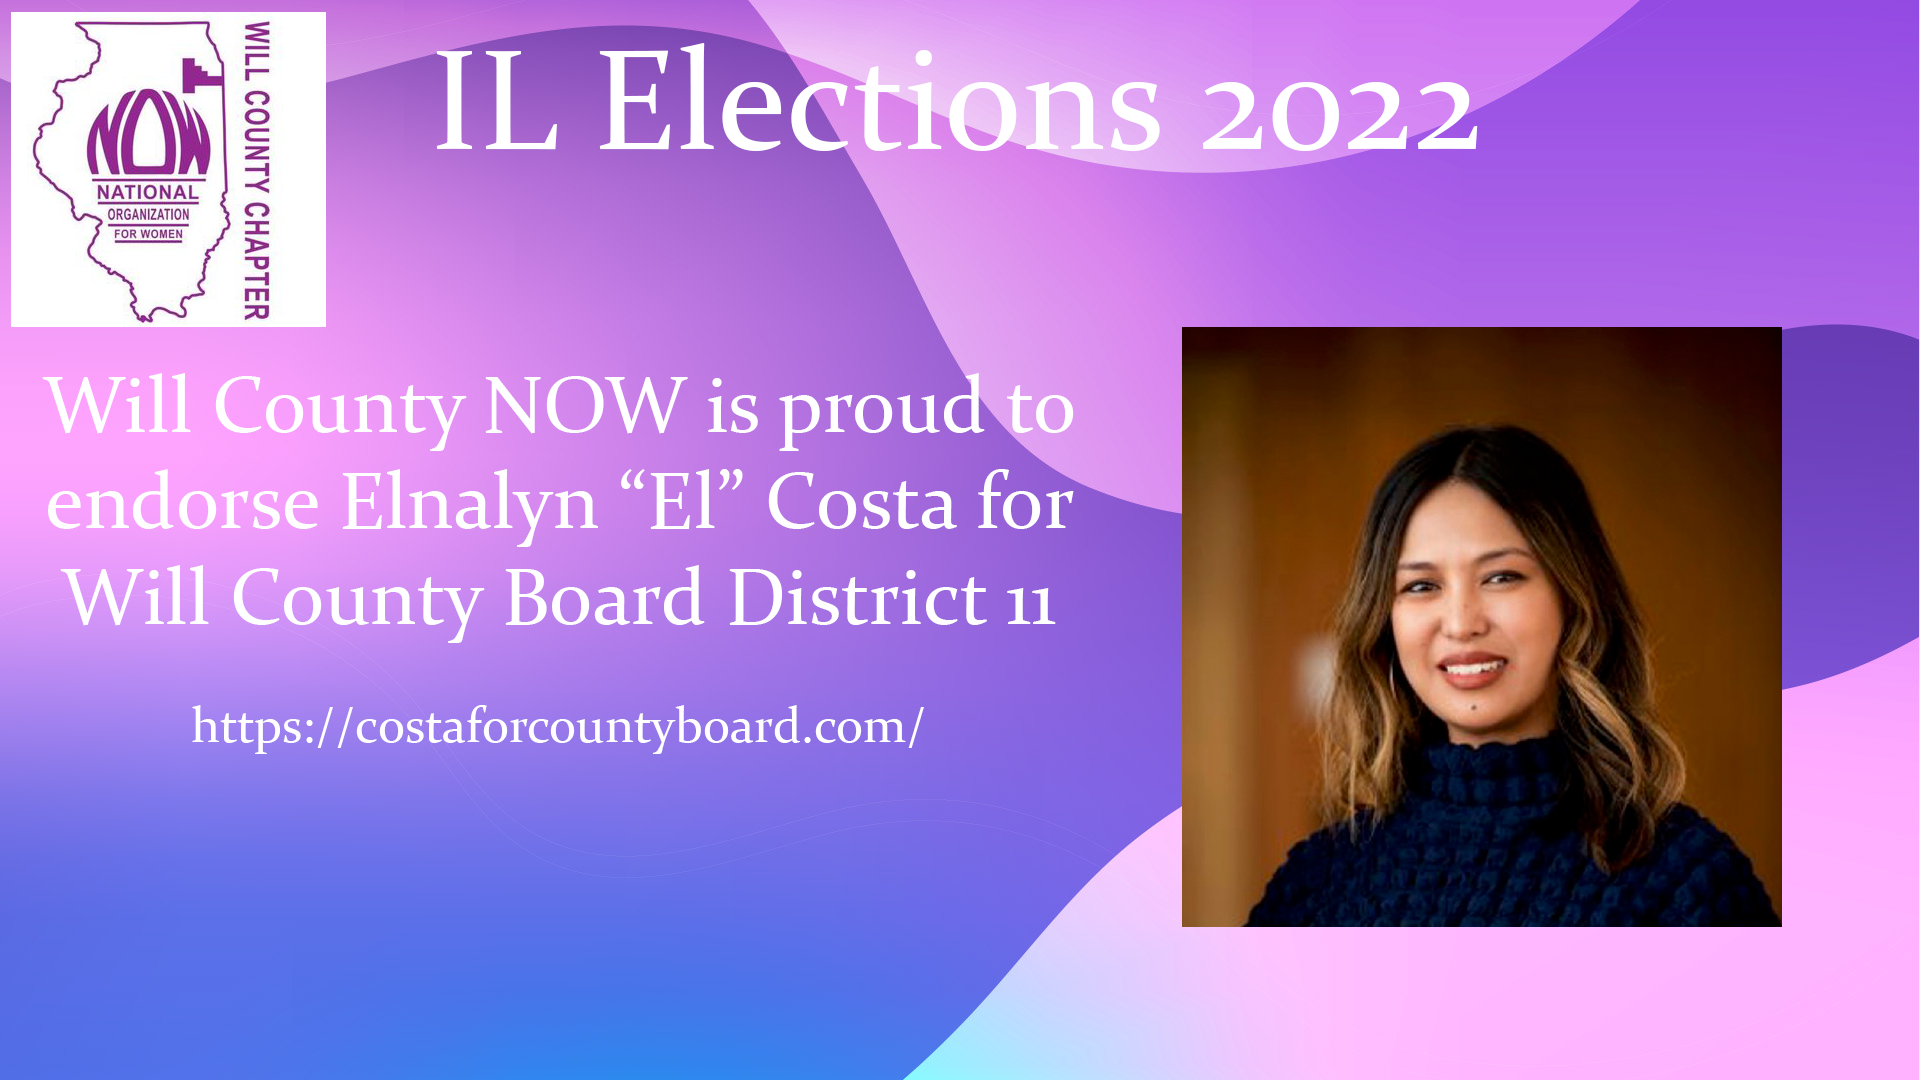 Will County NOW Endorses Elnalyn “El” Costa for Will County Board District 11